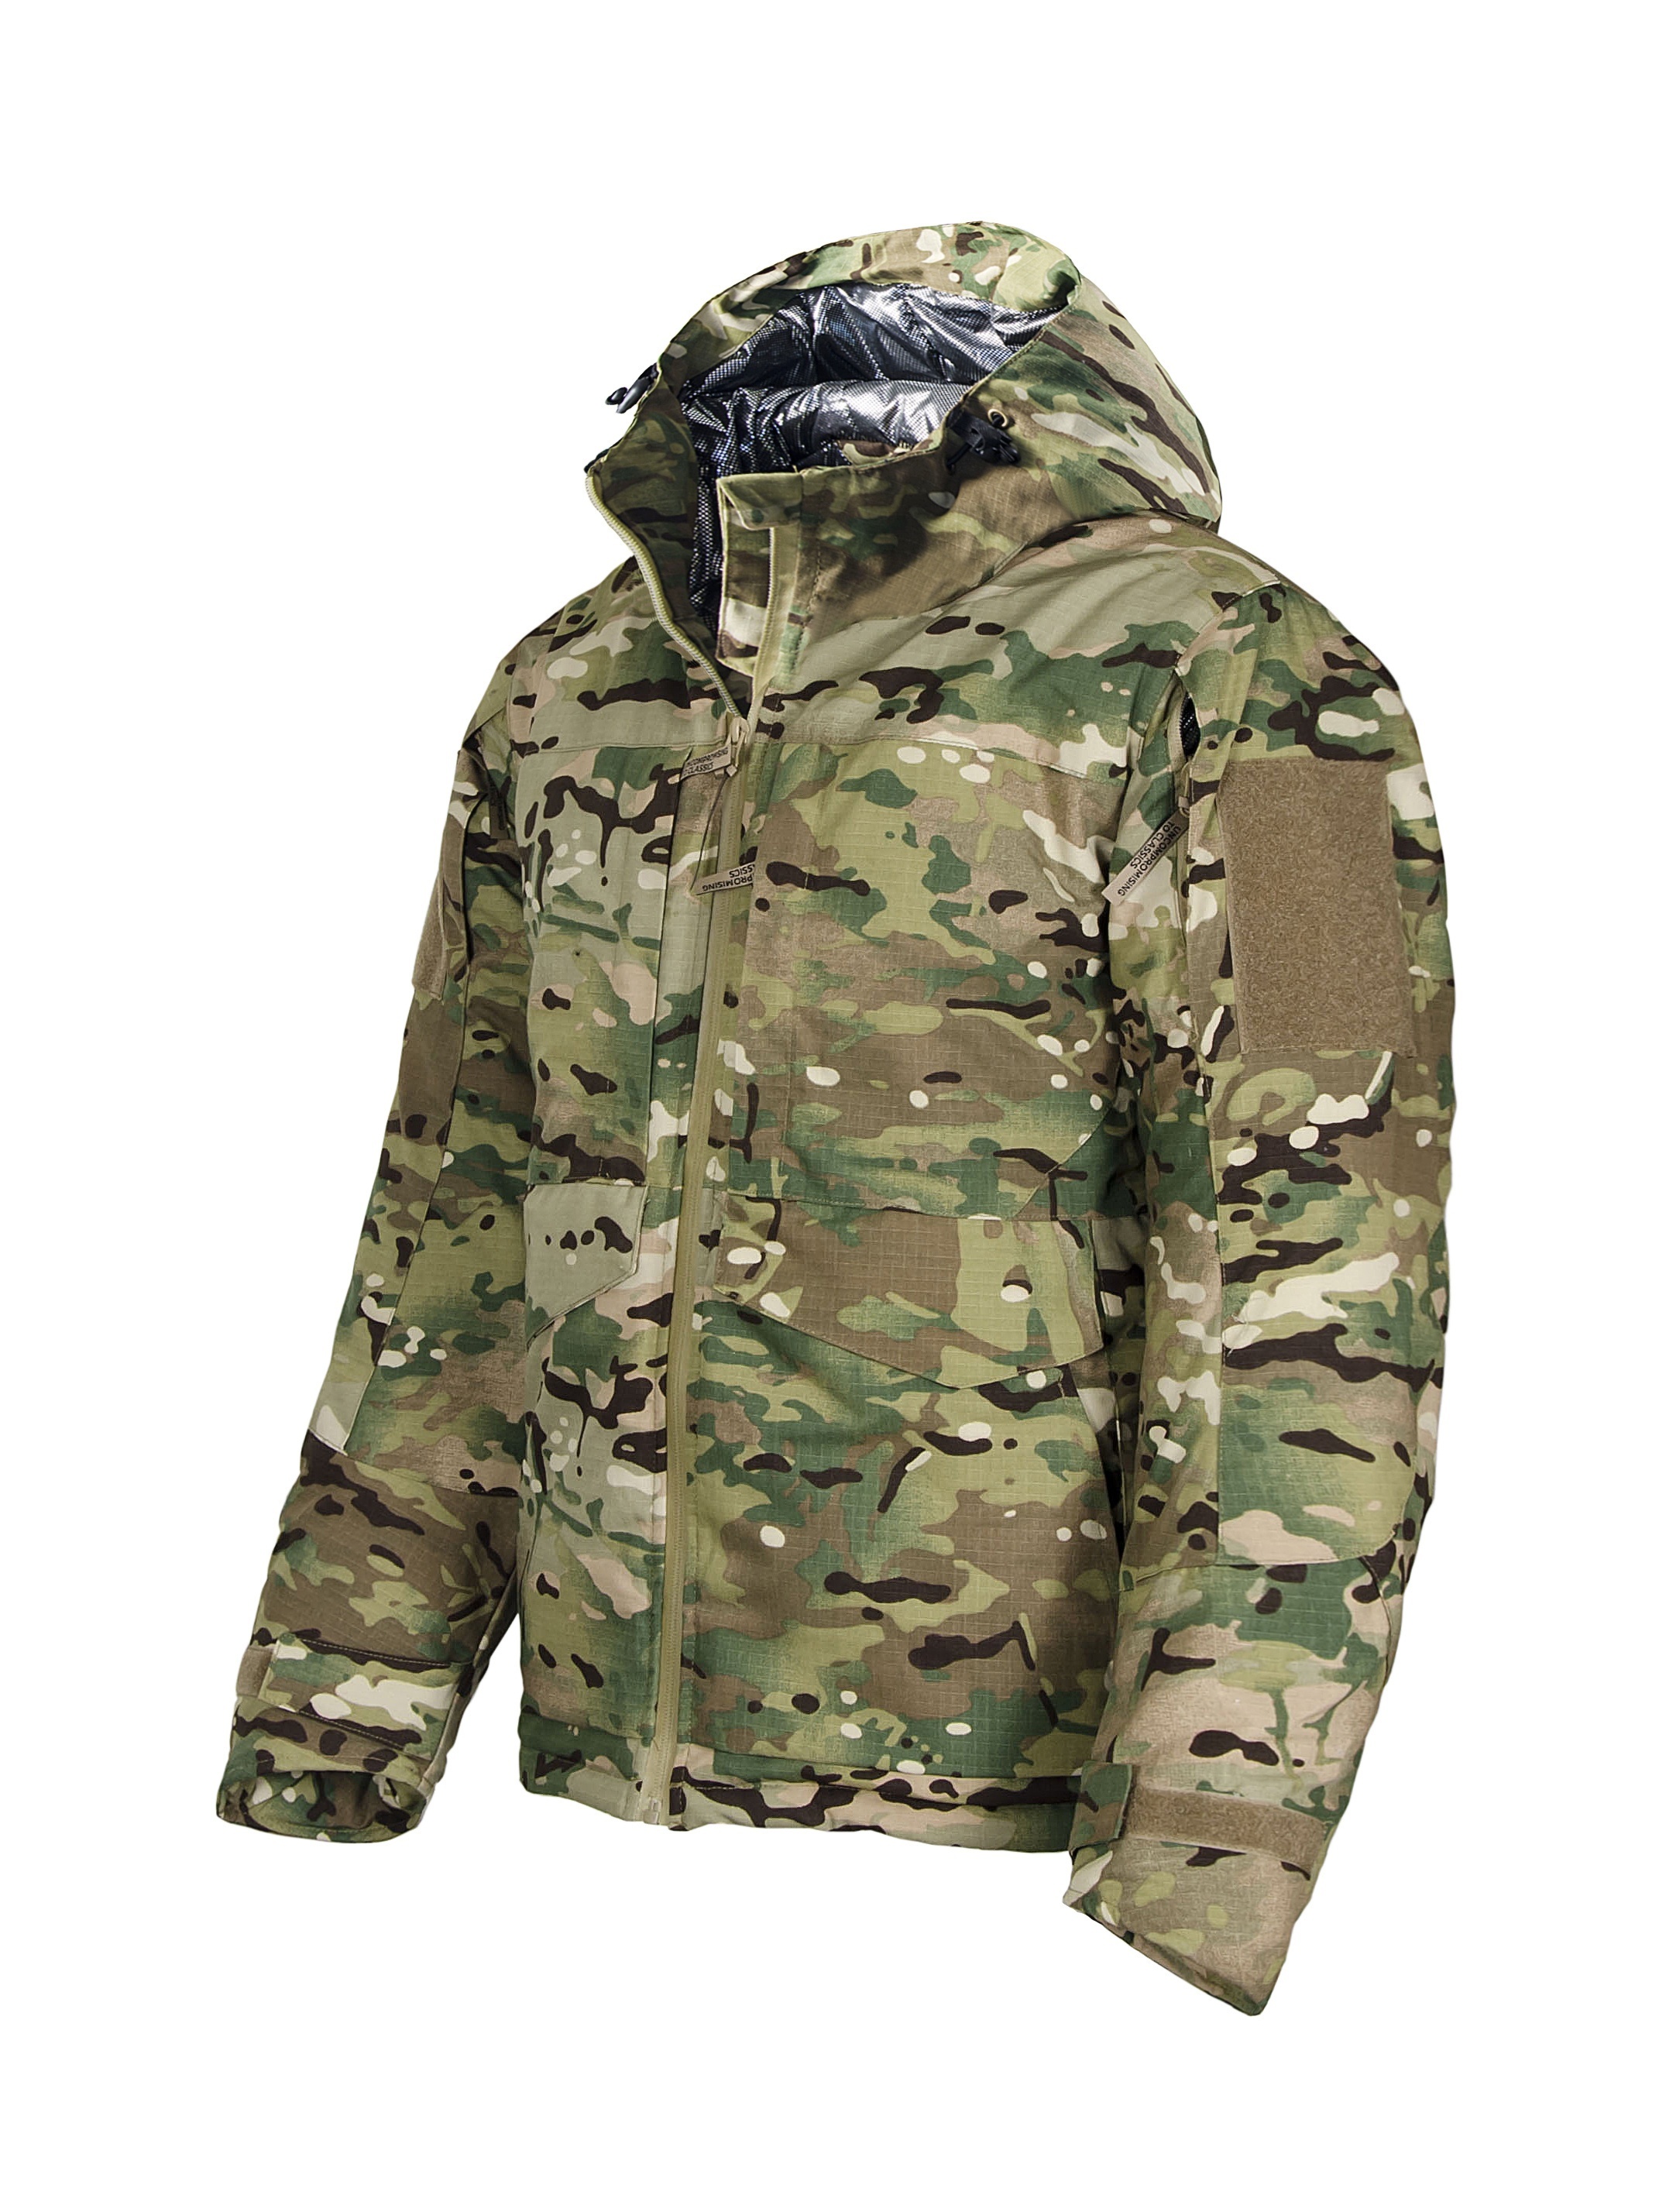 Men's Camouflage Pattern Hooded Waterproof Jacket, Chic Warm Padded Jacket  For Fall Winter Outdoor Activities